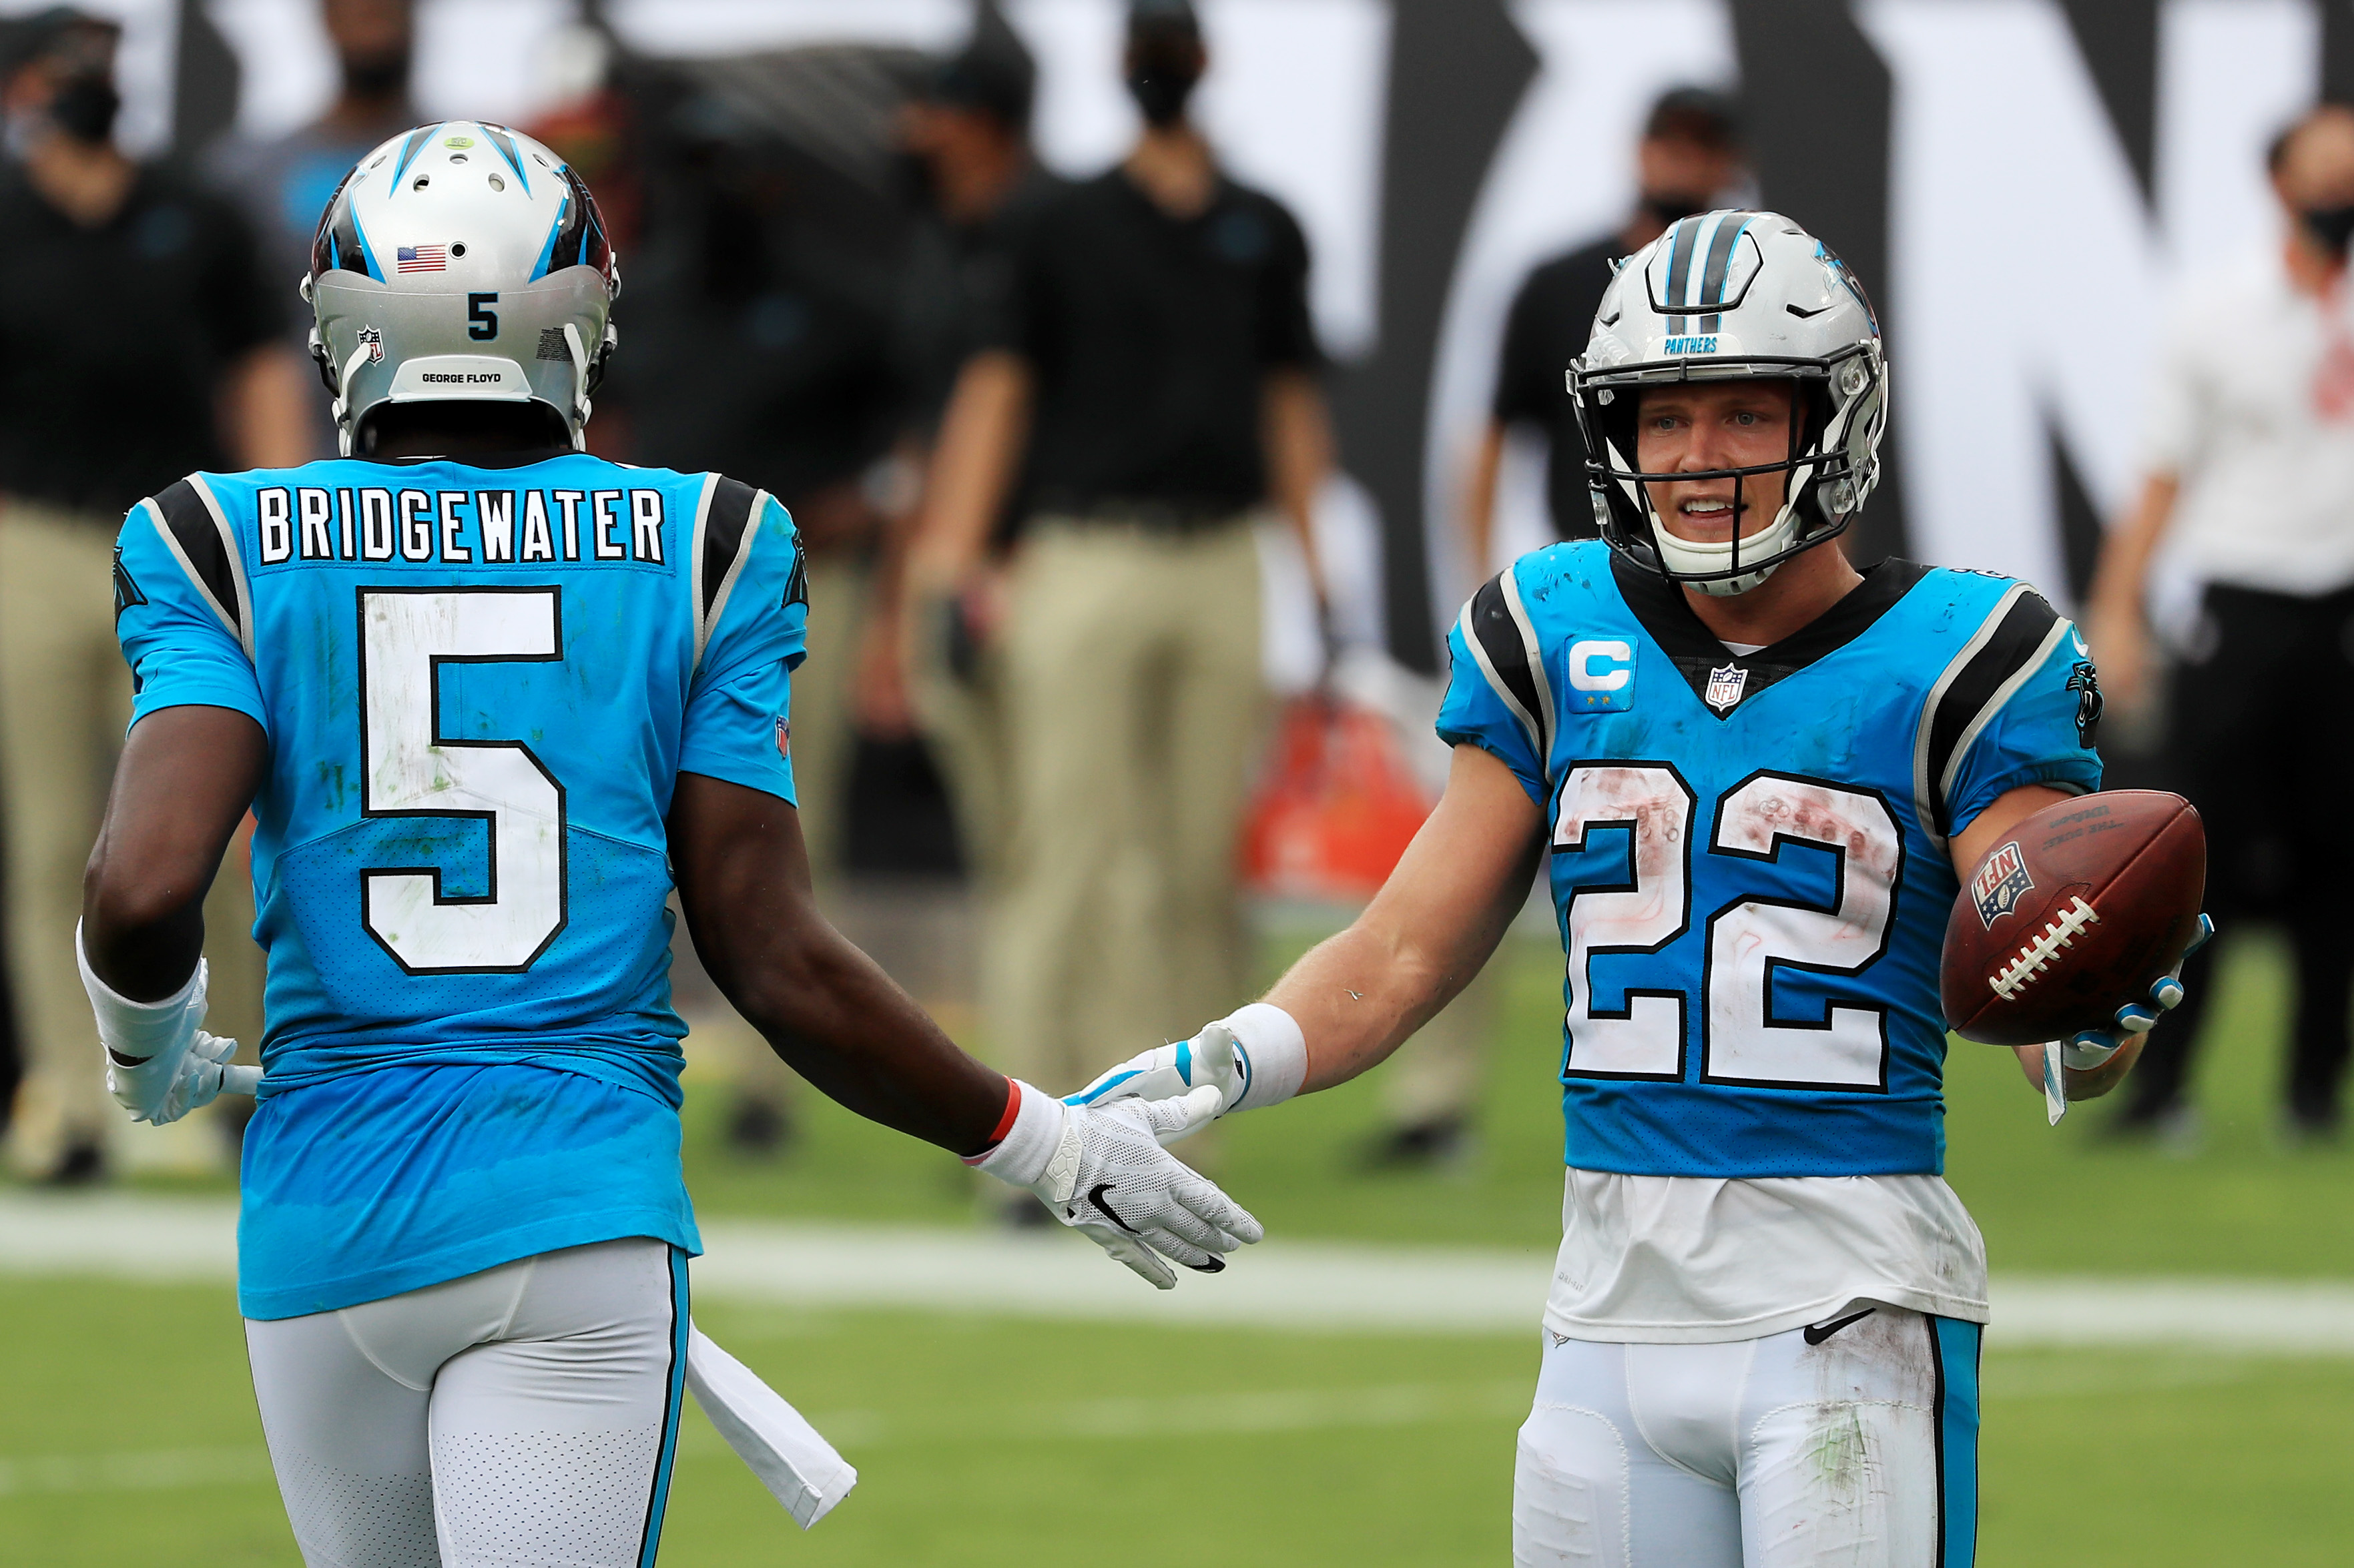 Christian McCaffrey #22 of the Carolina Panthers celebrates with Teddy Bridgewater #5 after scoring a touchdown during the third quarter against the Tampa Bay Buccaneers at Raymond James Stadium on September 20, 2020 in Tampa, Florida.